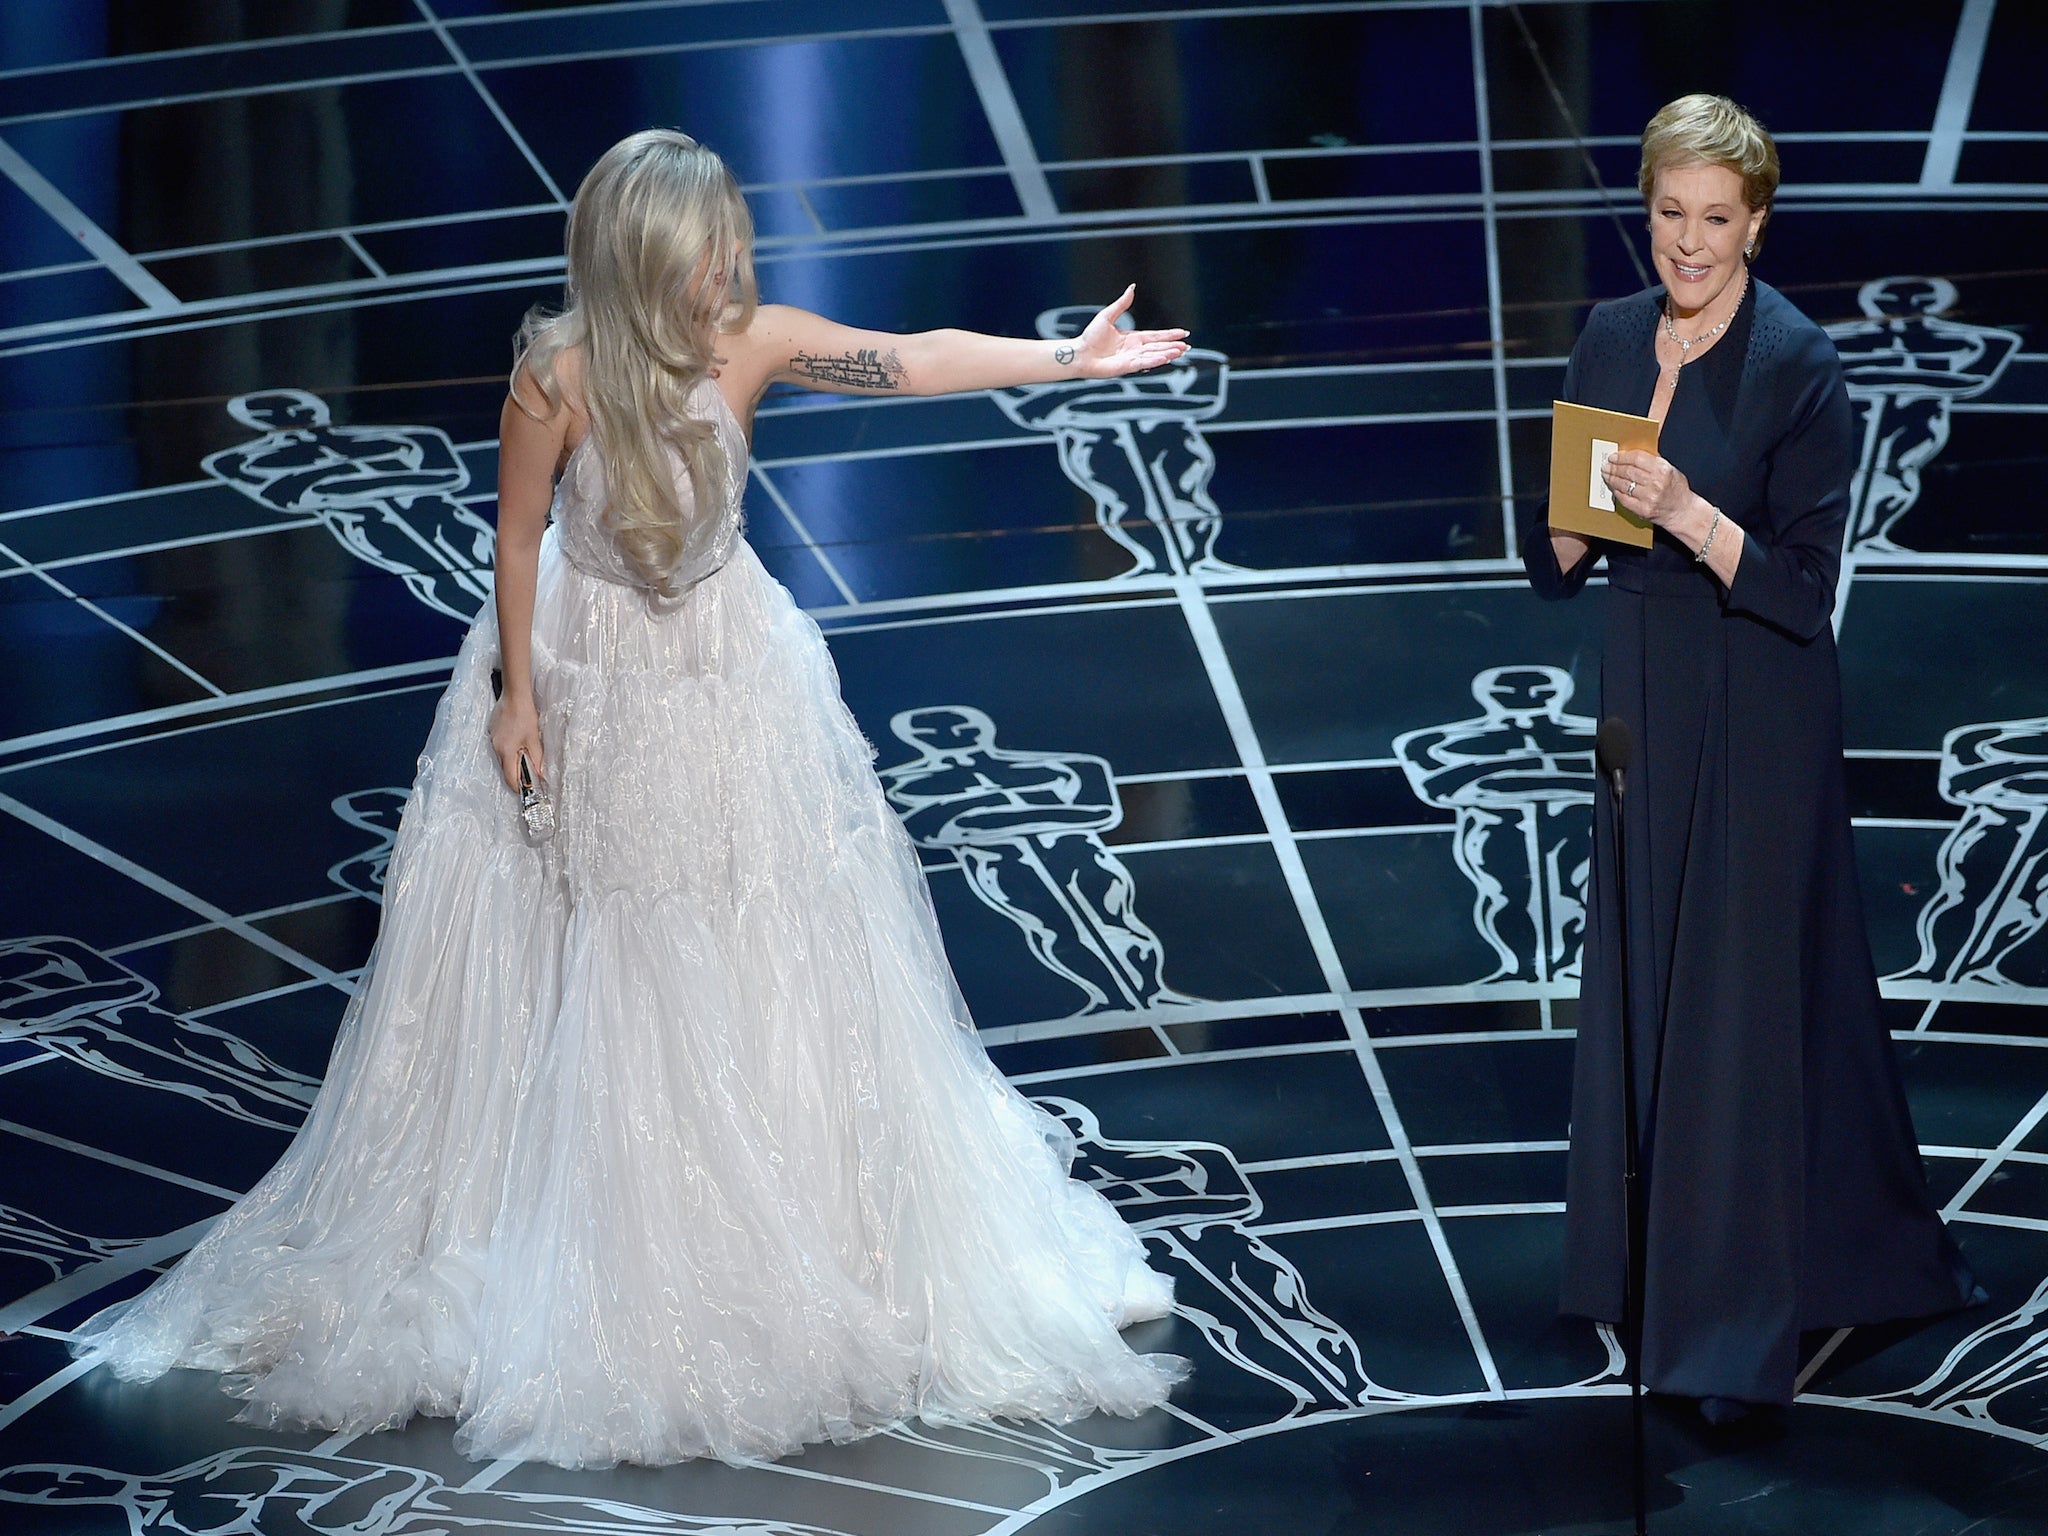 Julie Andrews led the applause for Lady Gaga